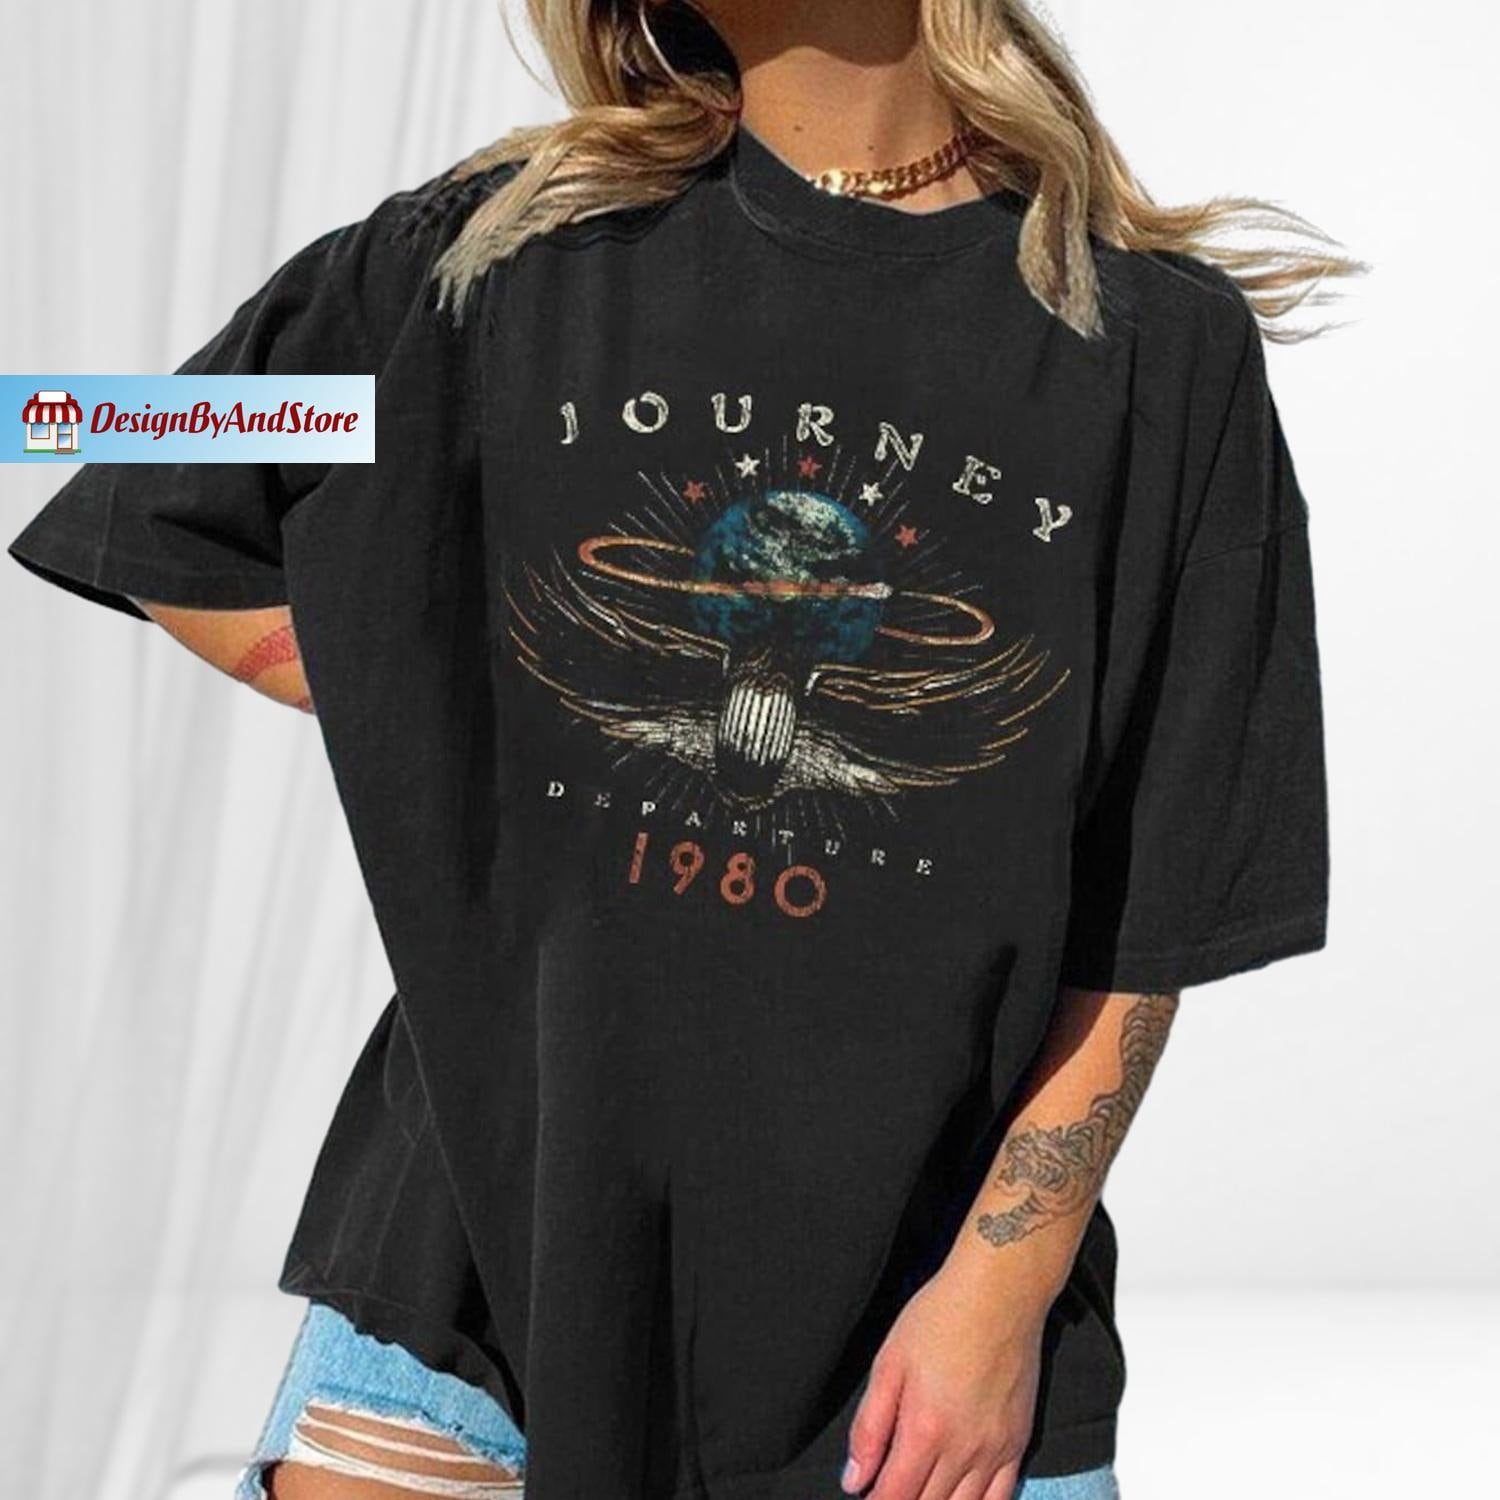 Journey Band T Shirt -  Canada